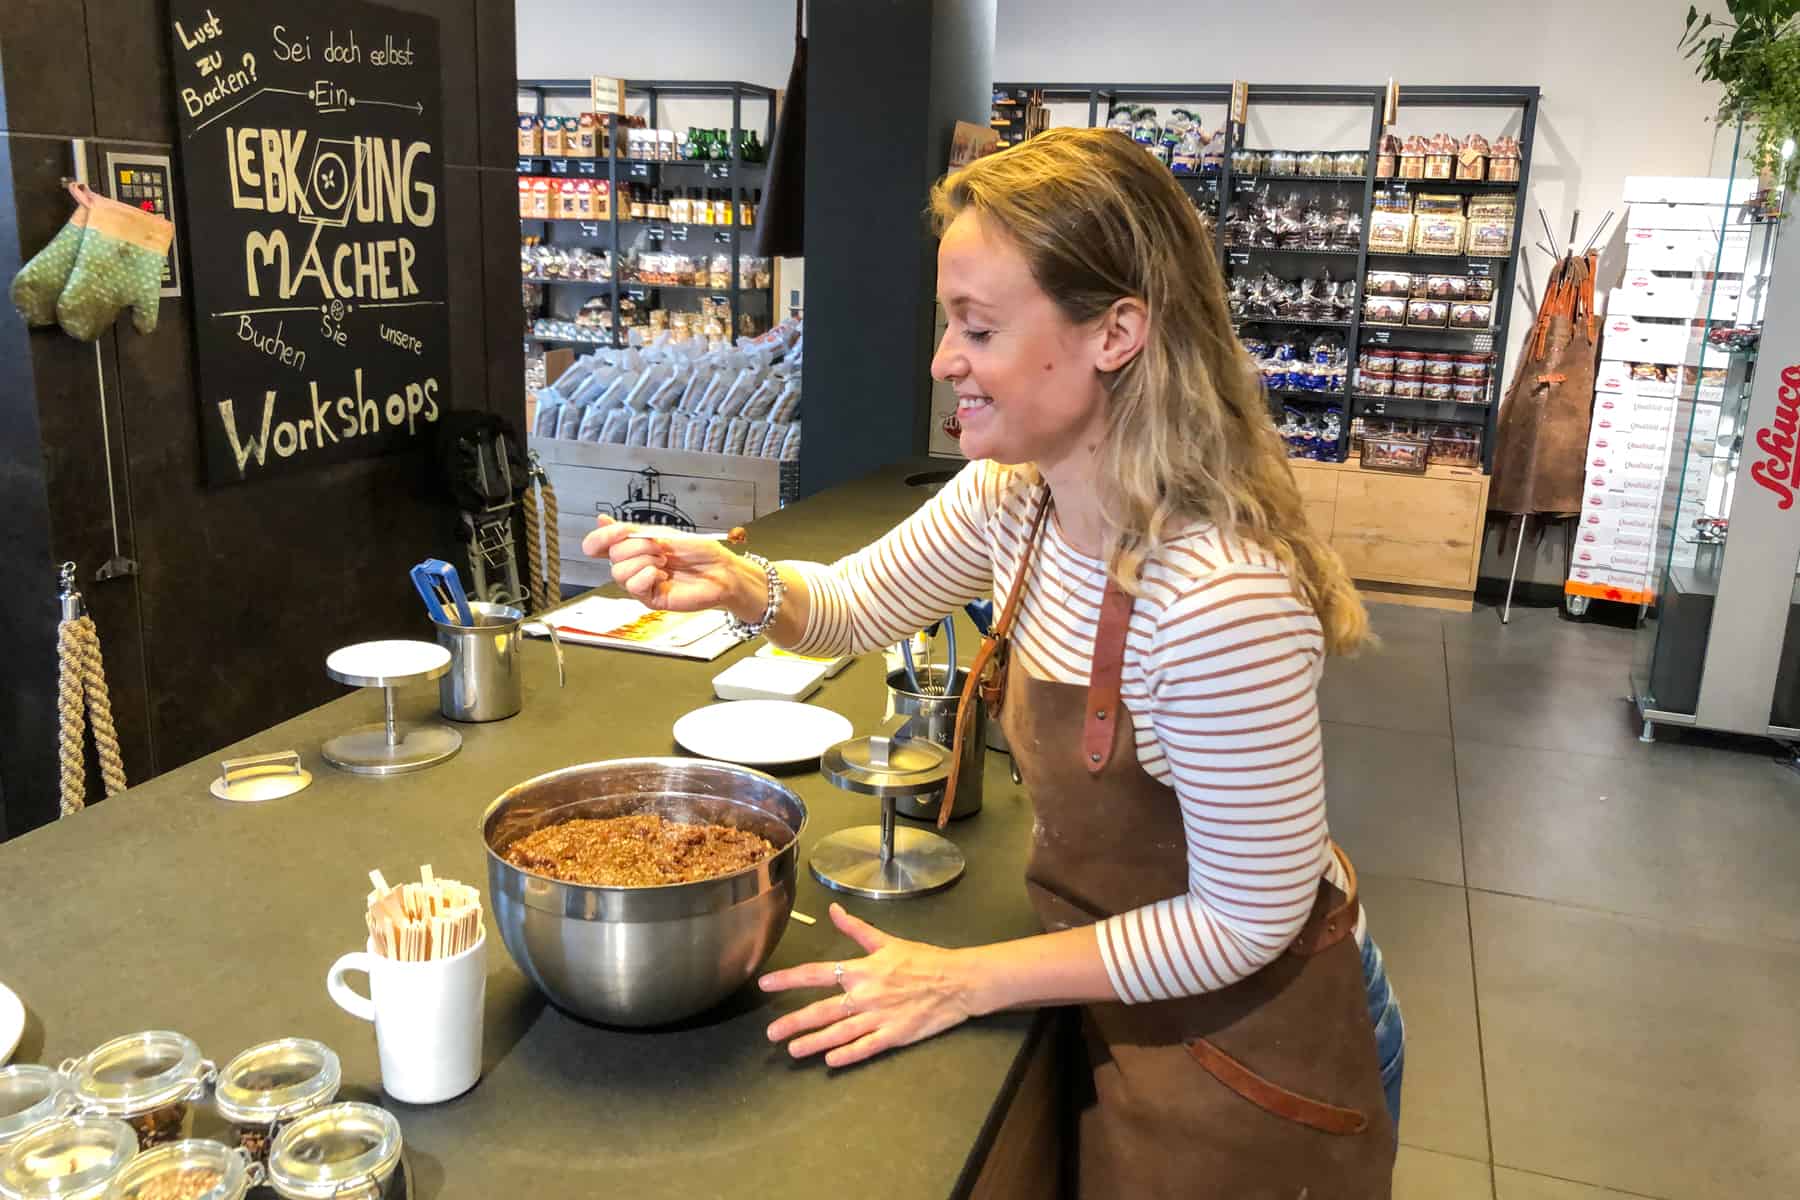 A woman in a striped top and brown leather apron takes a spoonful of Nuremberg gingerbread mixture from a large metal bowl and is about to eat it